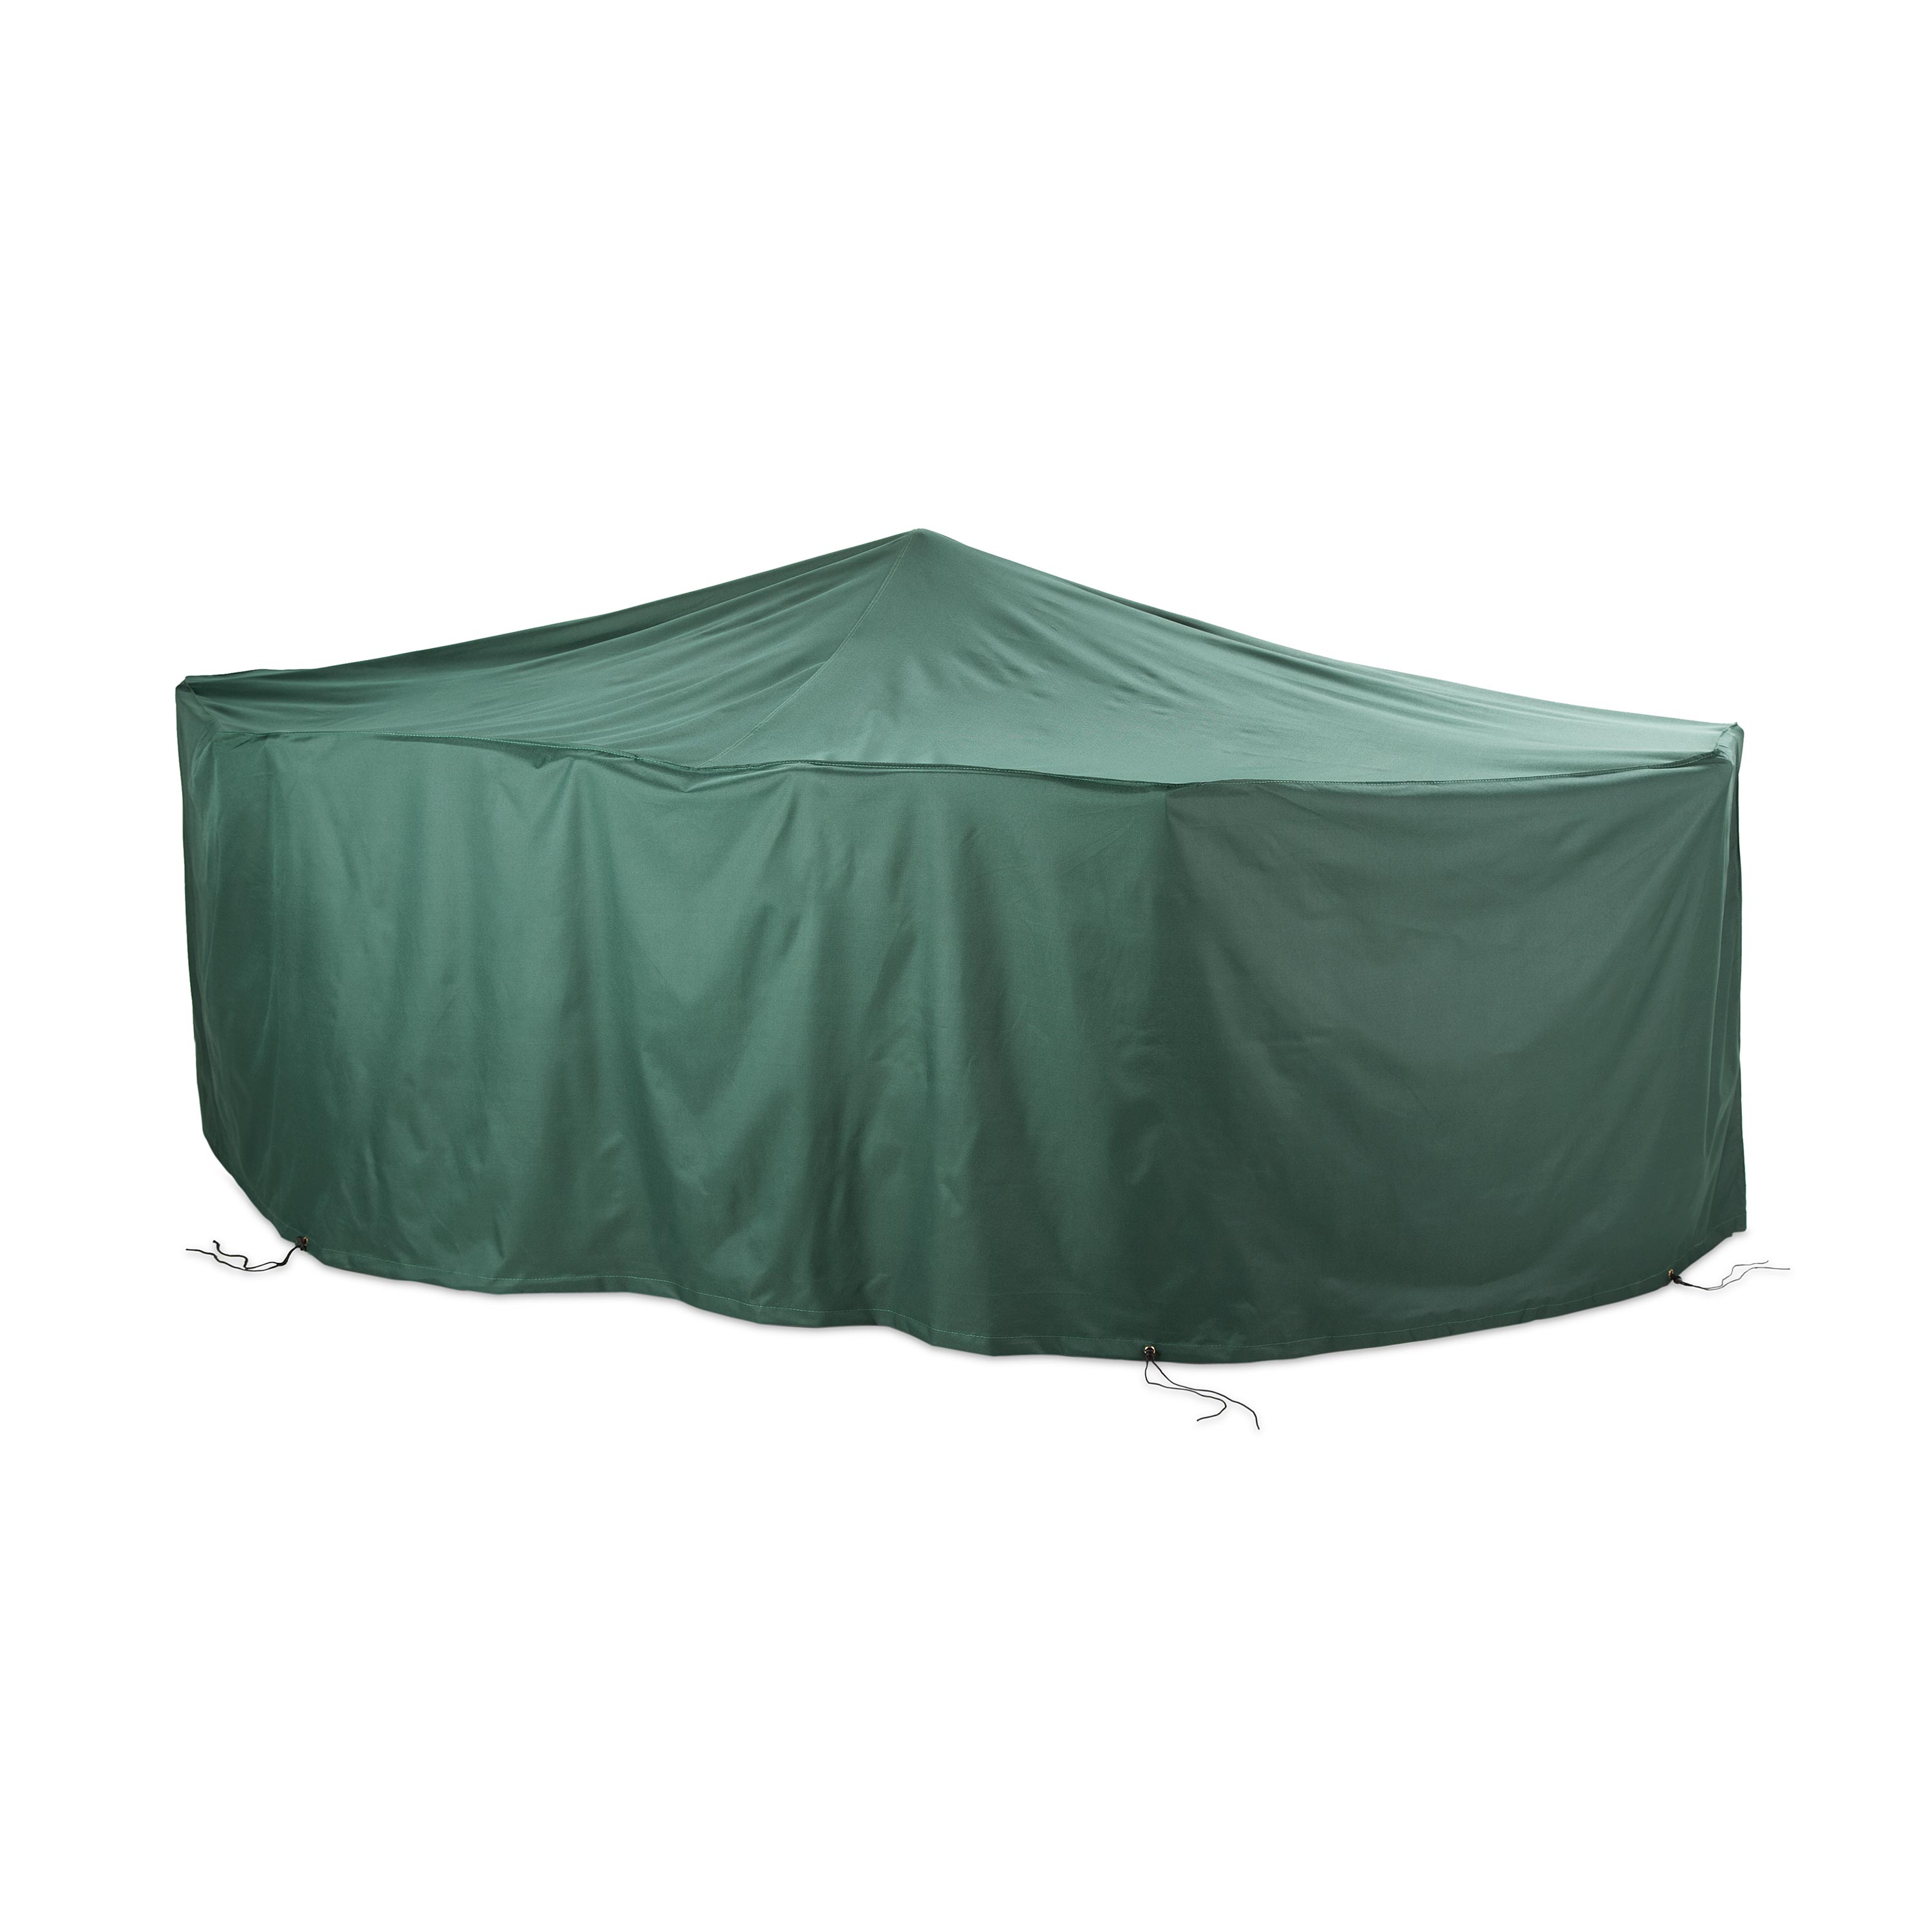 106" x 71" Large Rectangle Table Outdoor Furniture Cover, in Green